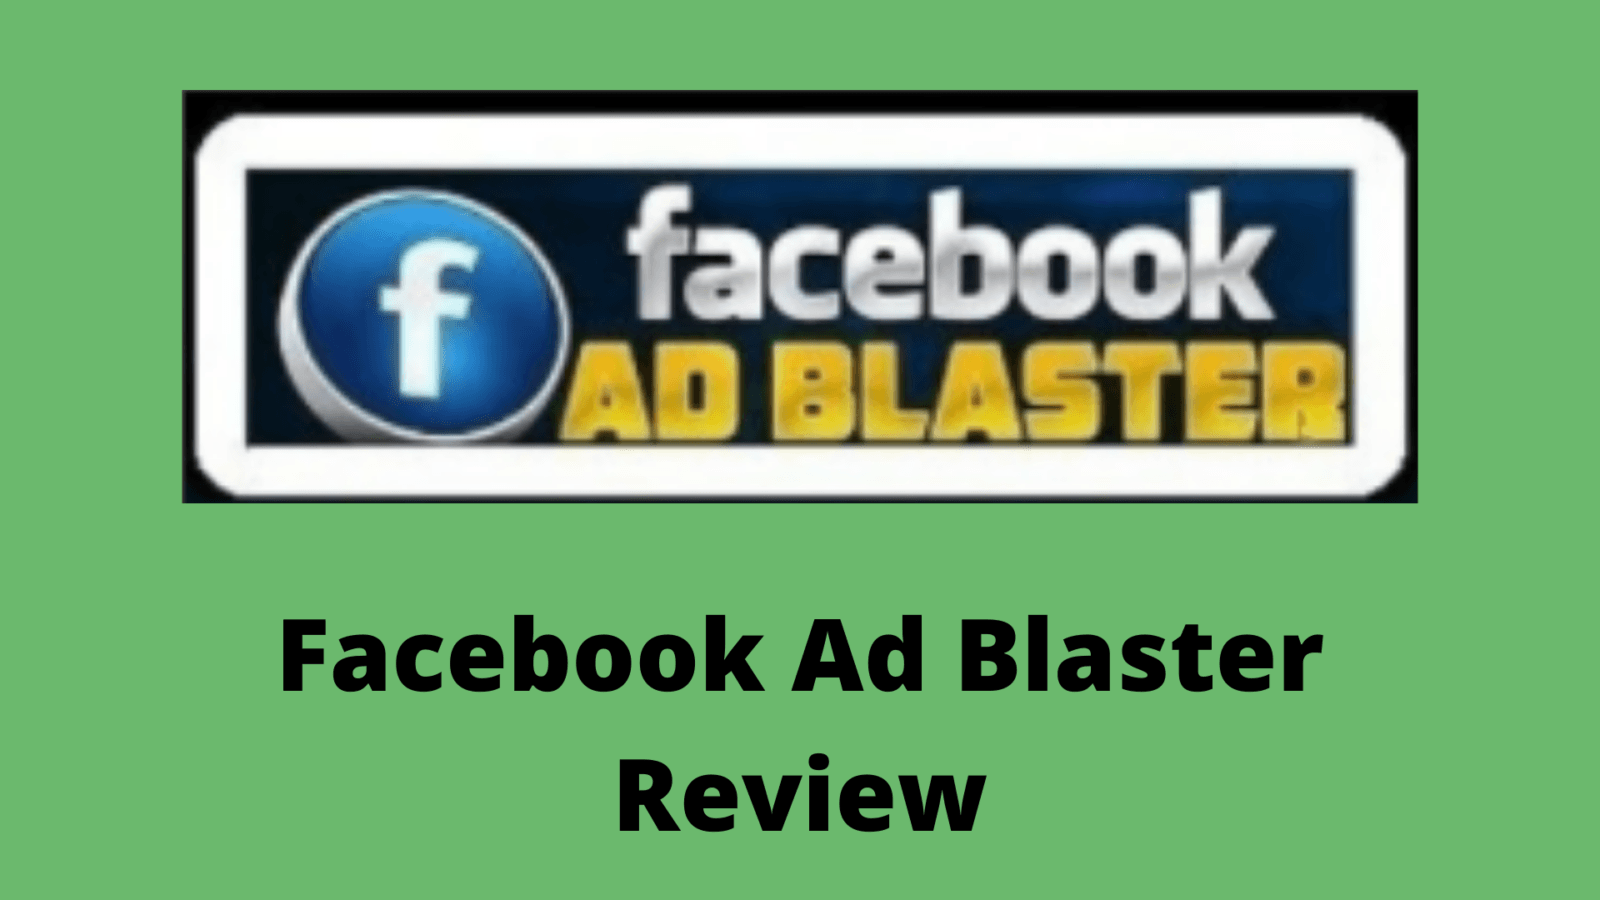 Facebook Ad Blaster Review